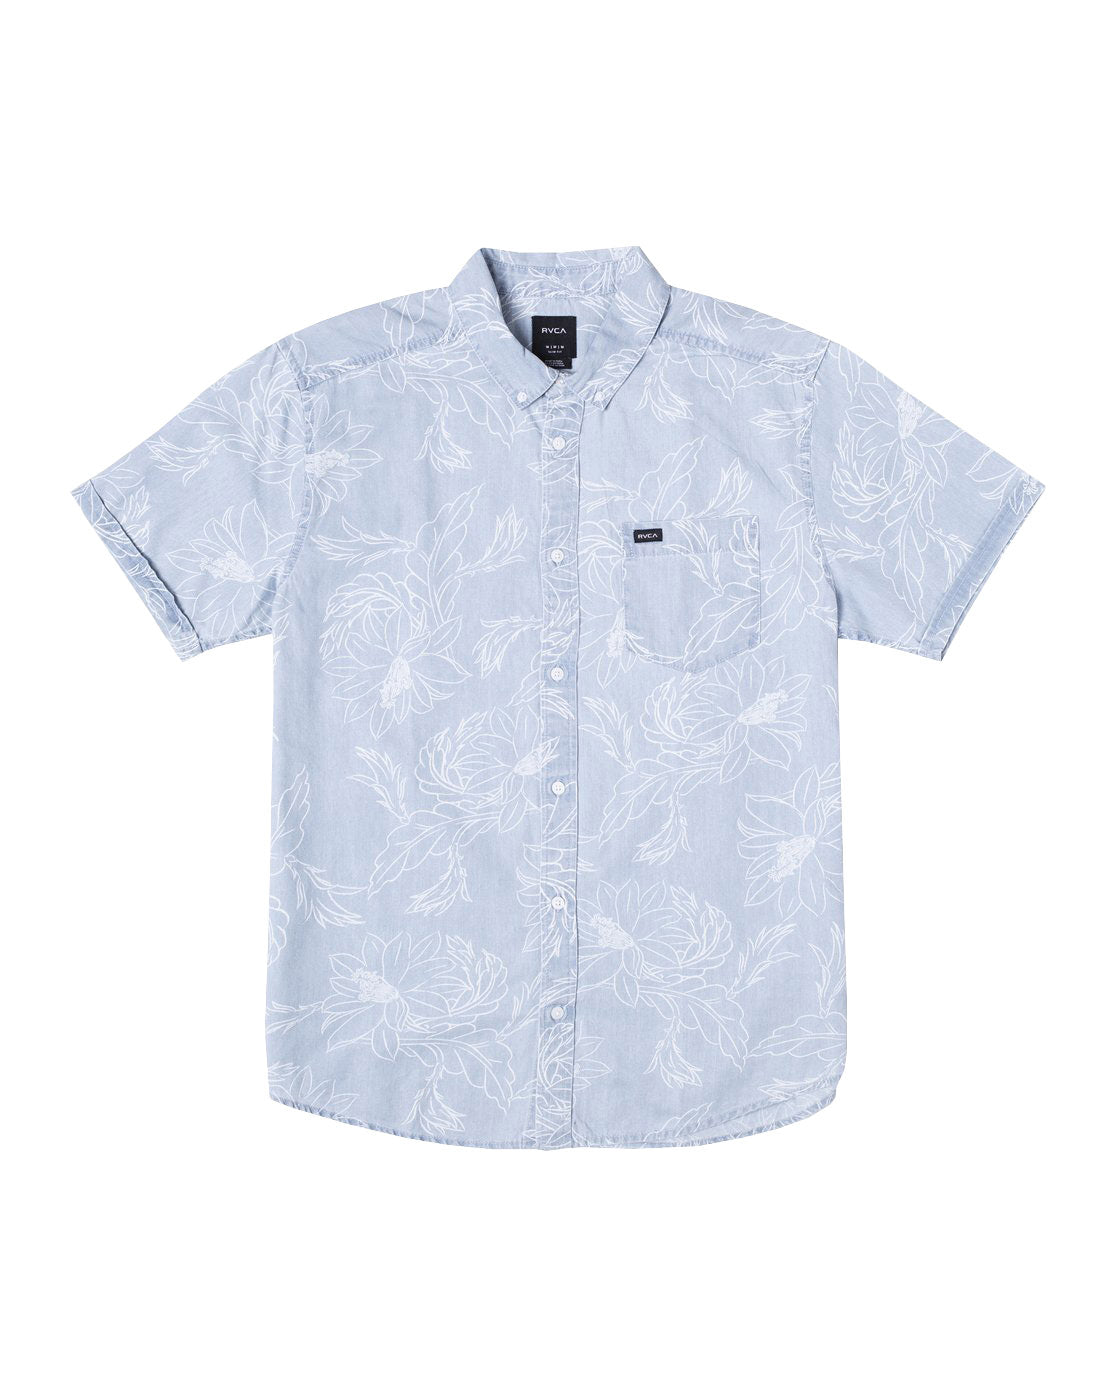 RVCA Hastings Floral SS Shirt DEN M